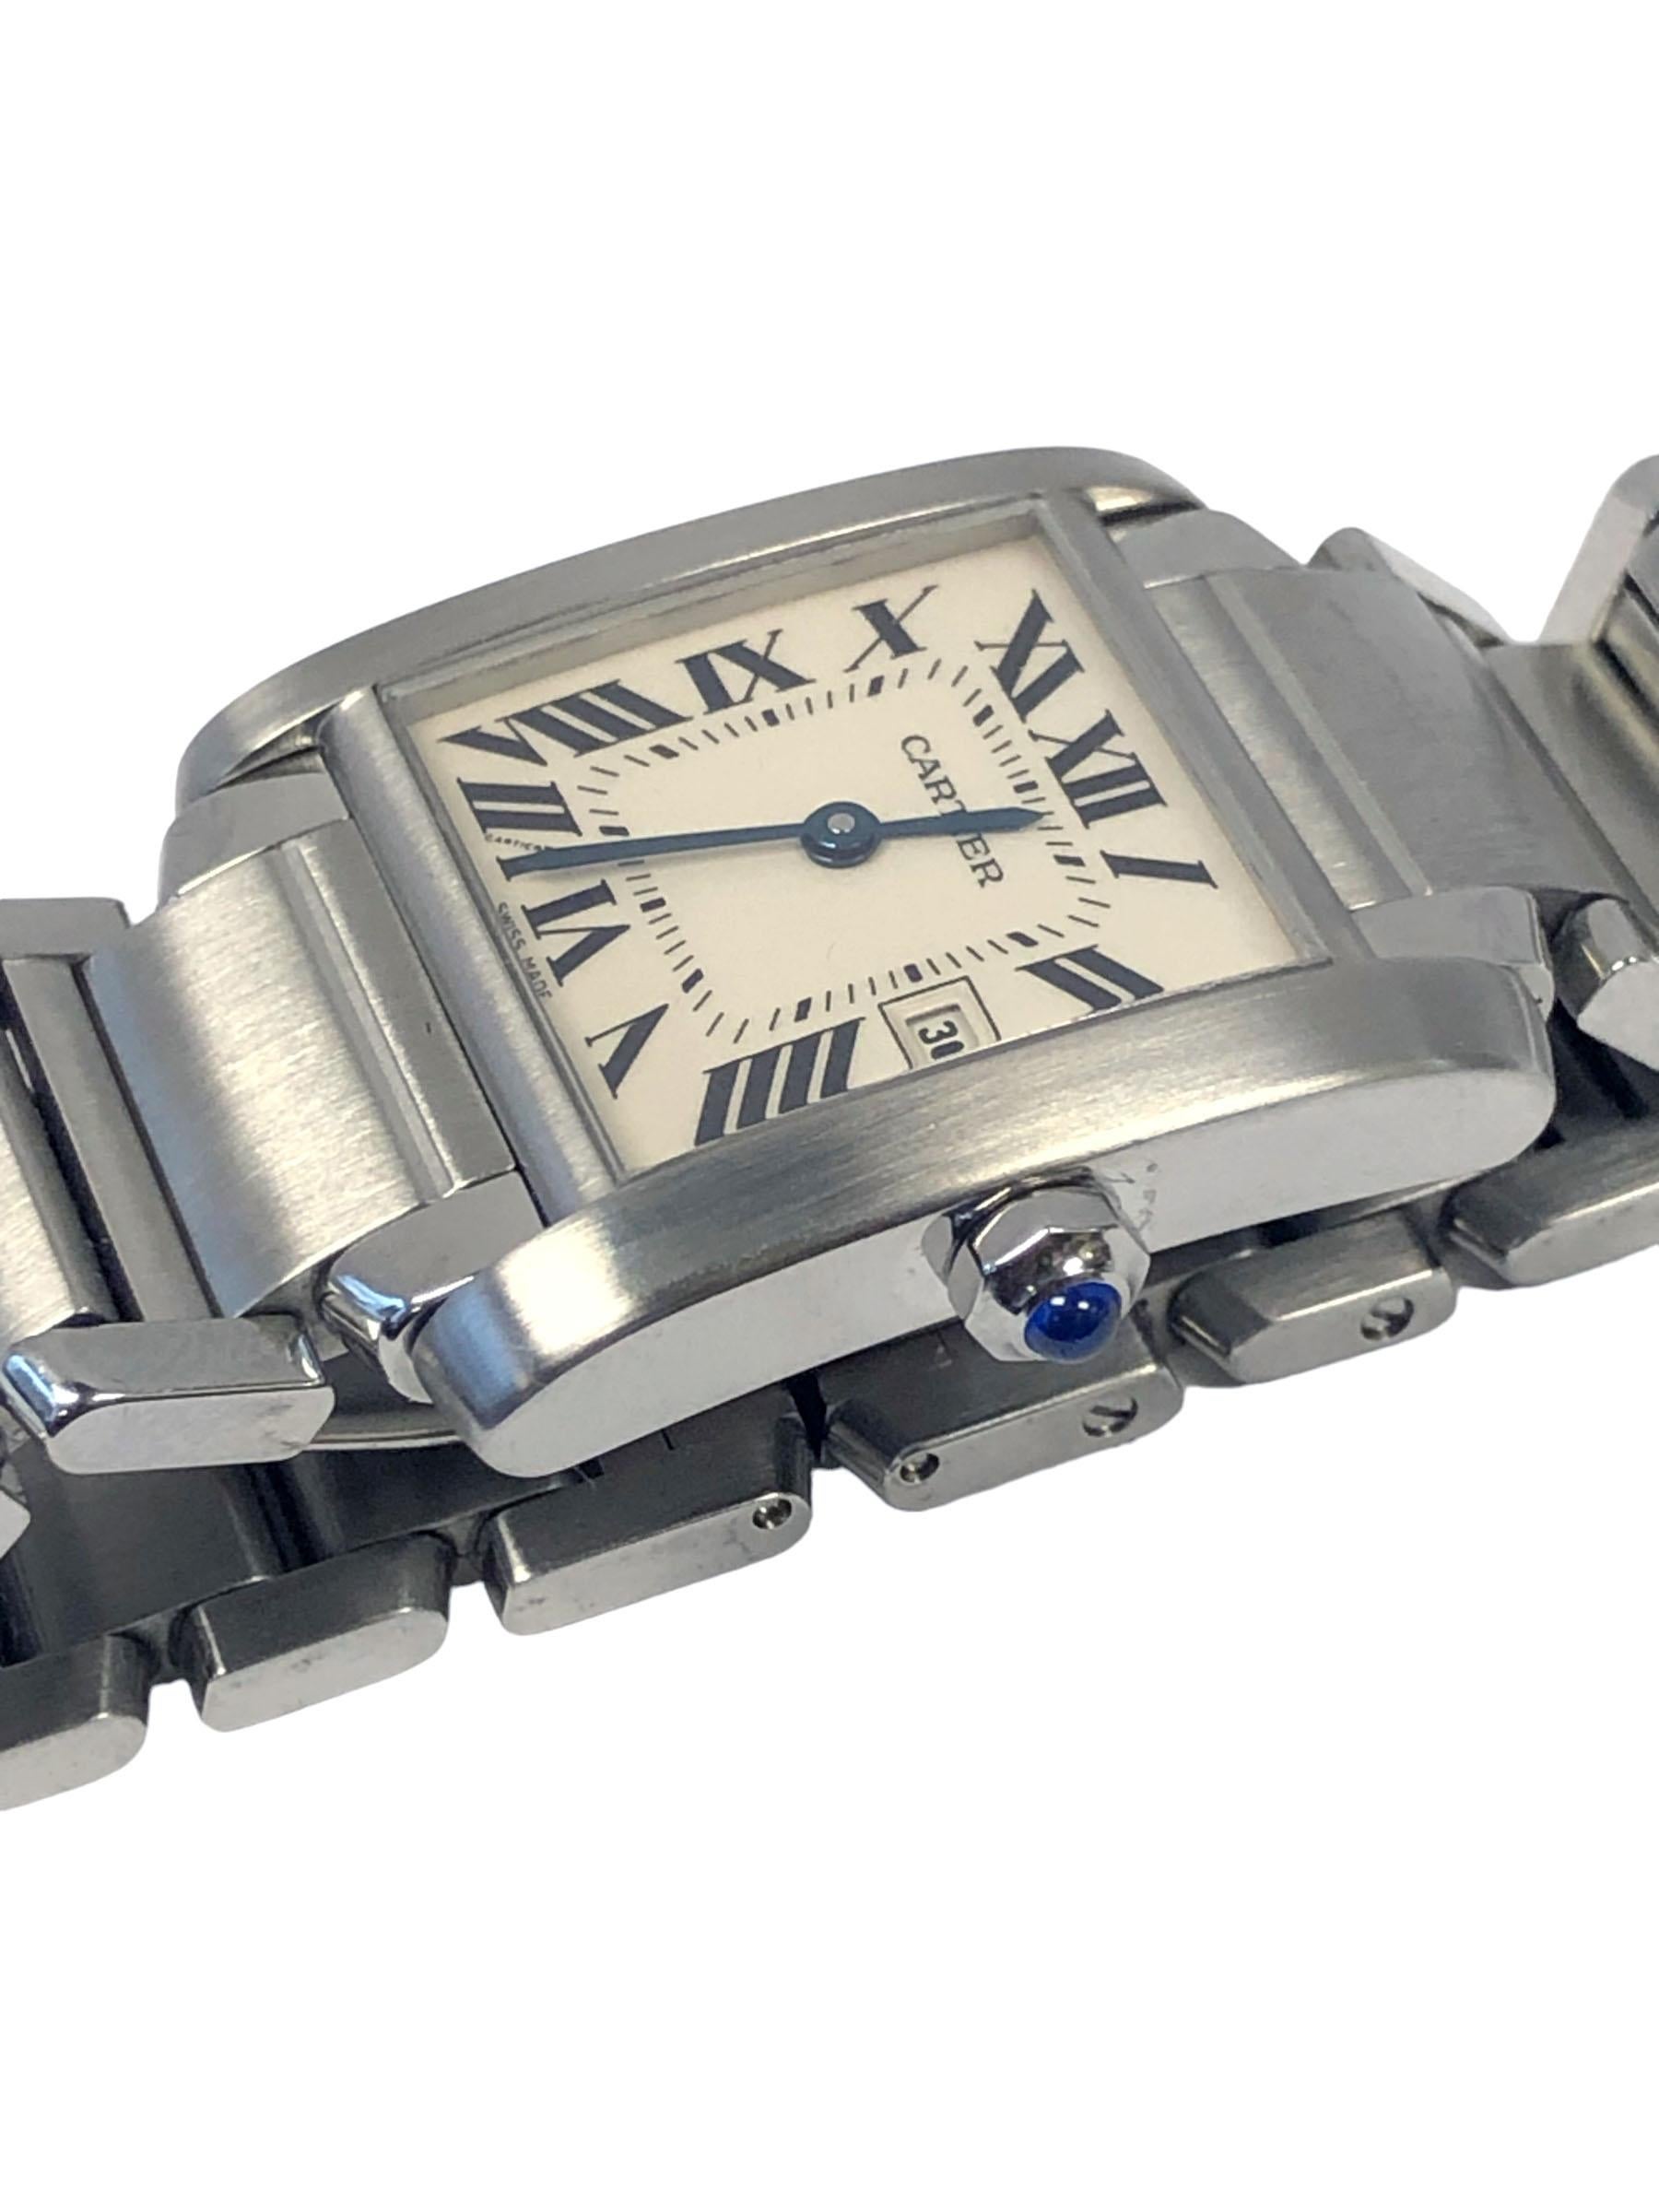 Circa 2015 Cartier Tank Francaise, Reference 2465 Mid Size Wrist Watch, 25 x 20 M.M. Stainless Steel Water Resistant Case. Quartz Movement, Silvered White Dial with Black Roman Numerals and a Calendar window at the 3 position, Sapphire Crown. 5/8